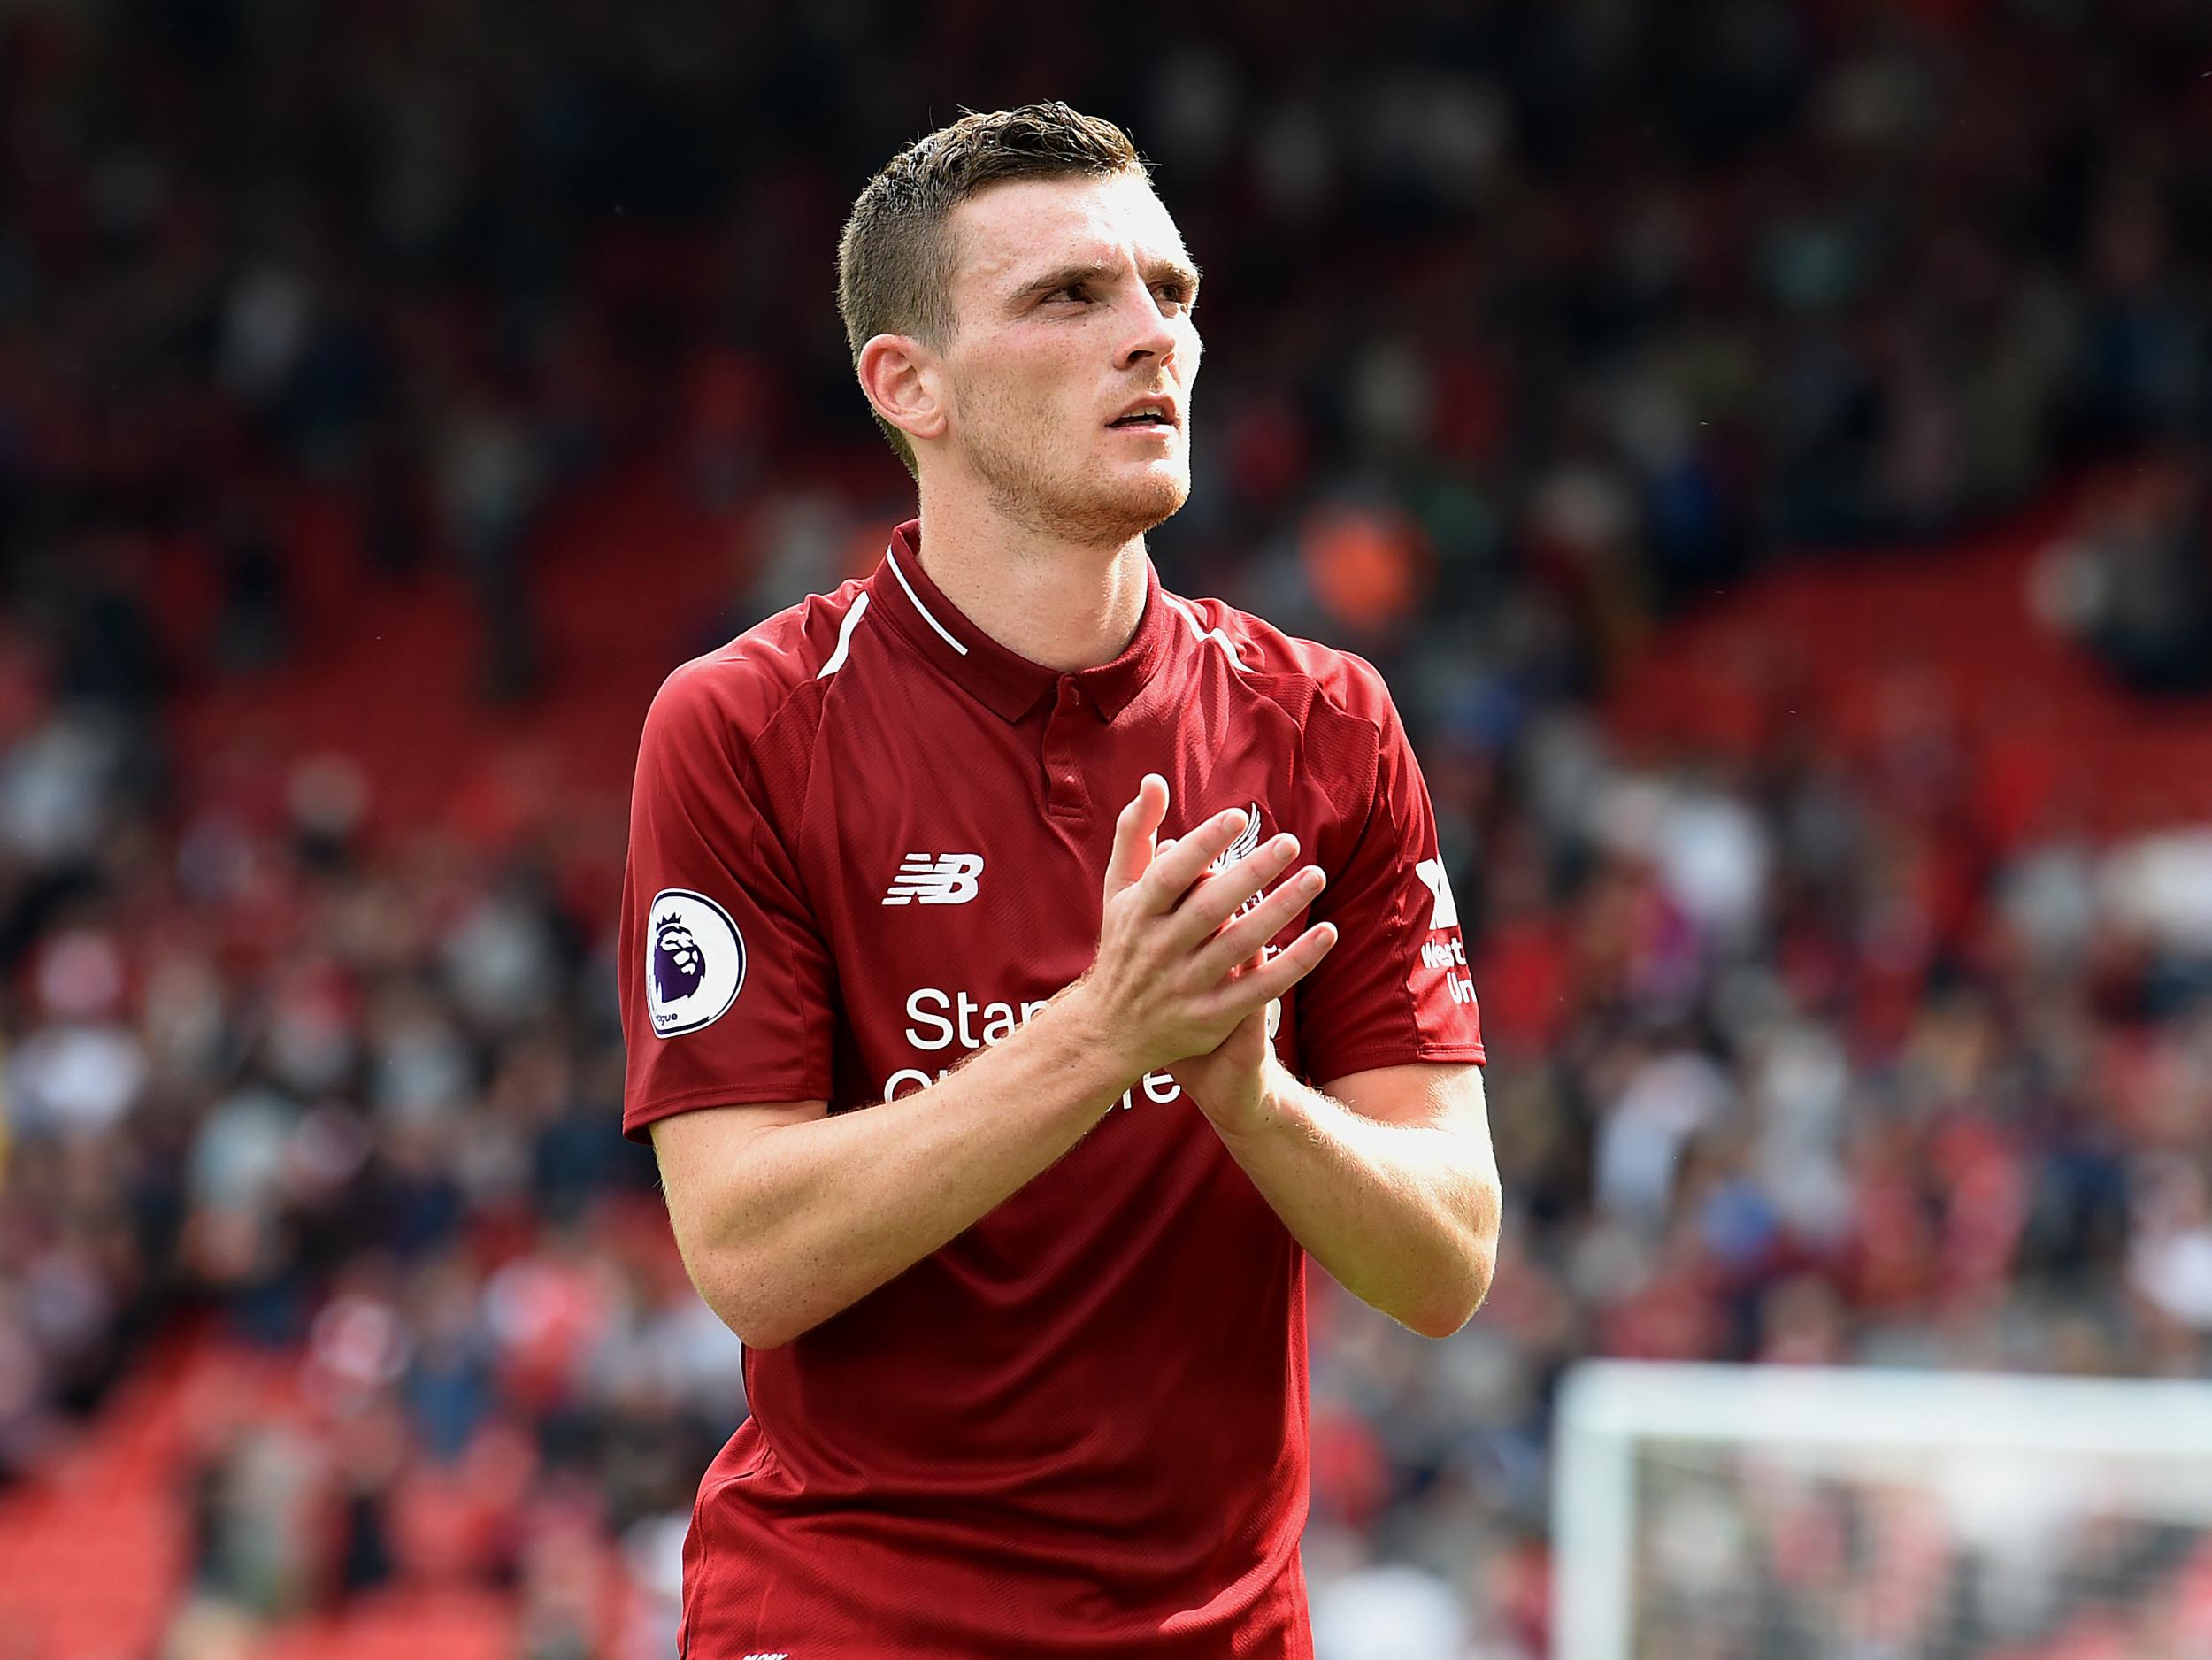 Robertson has emerged as a key figure at Anfield under Klopp